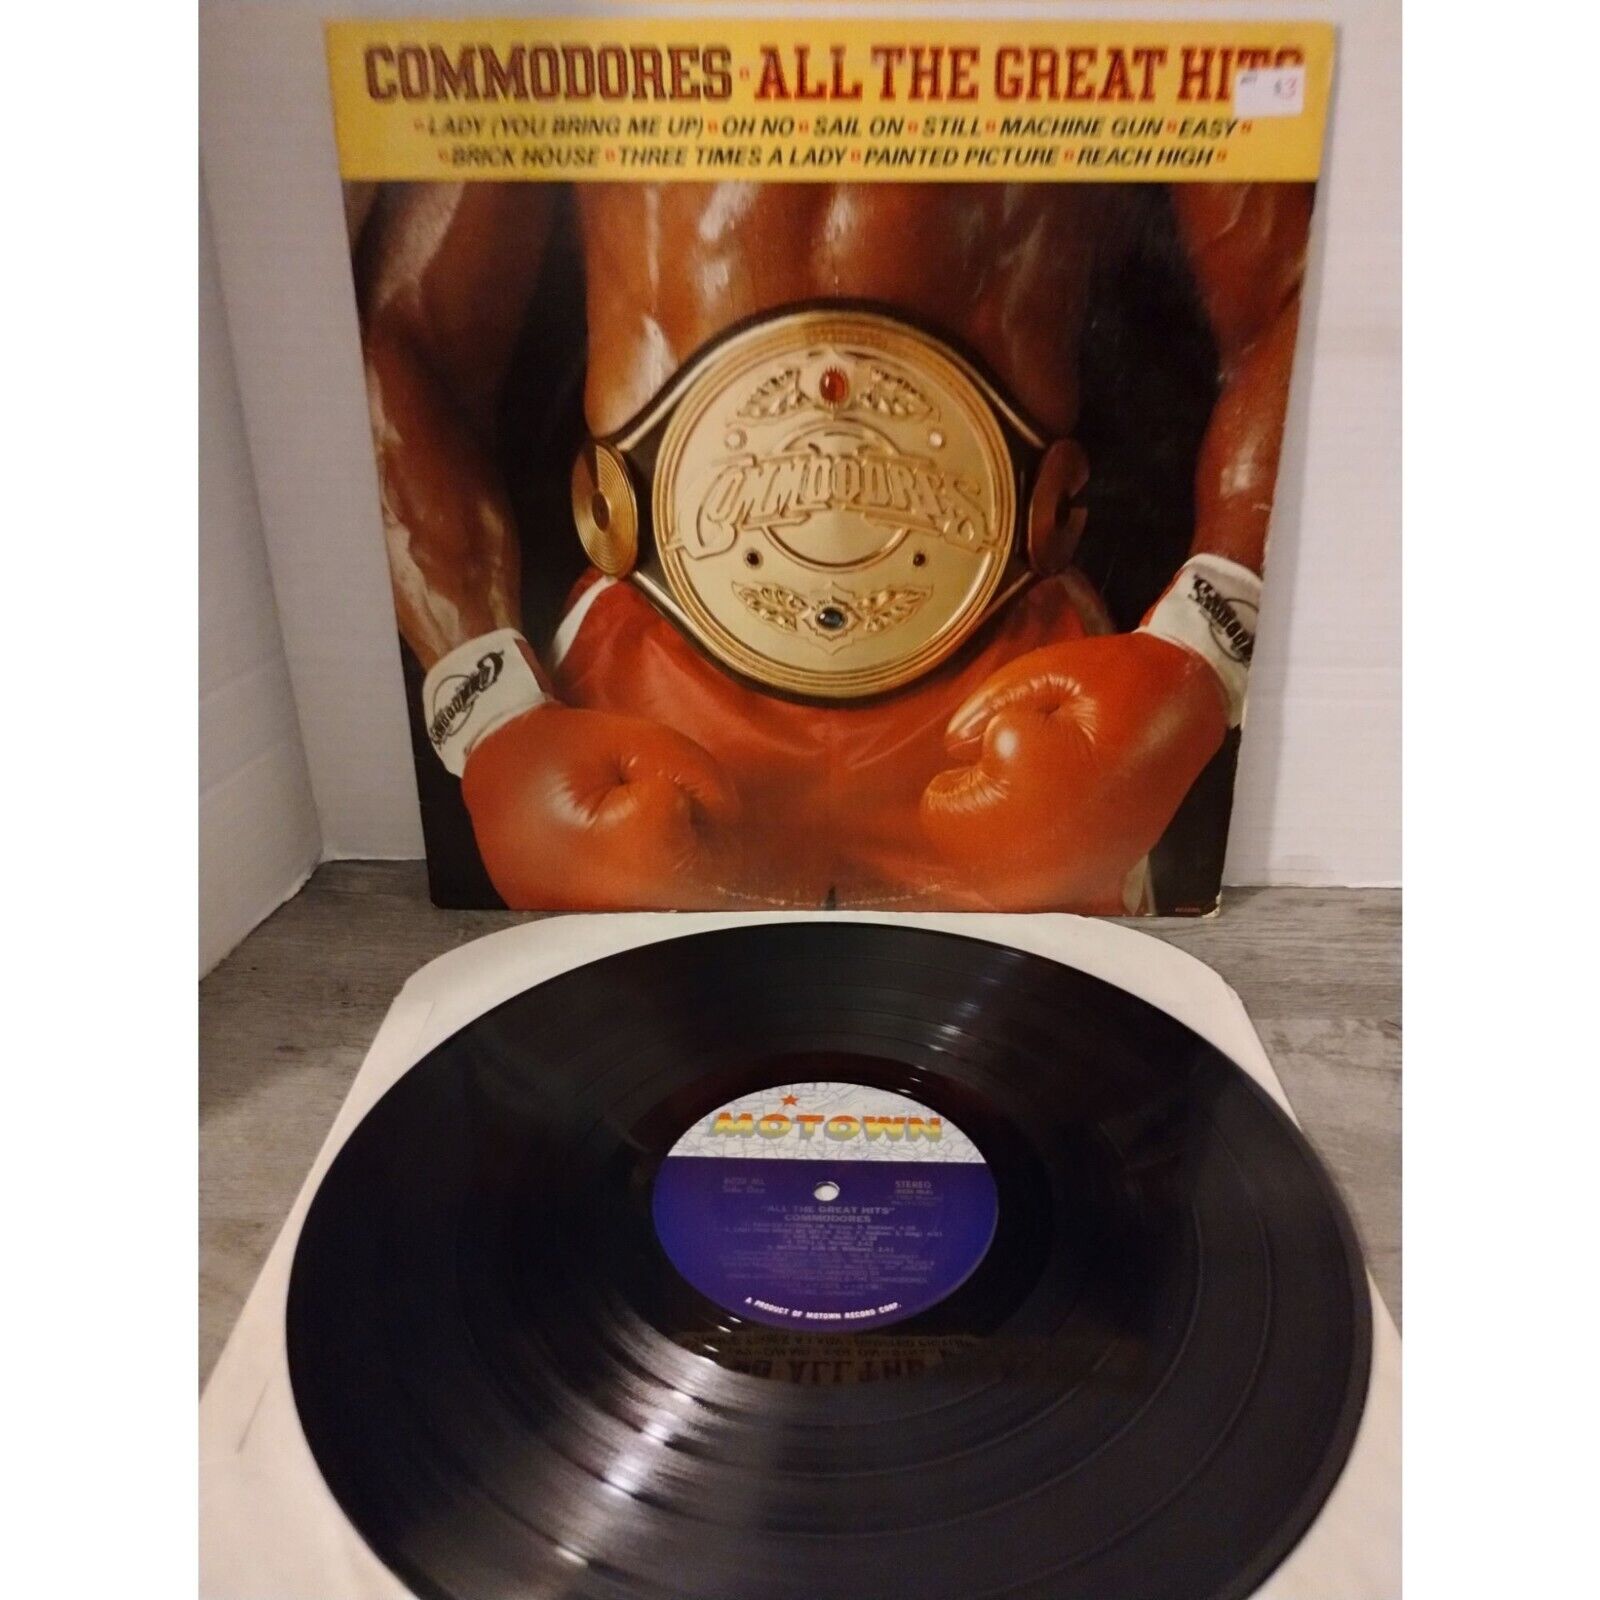 Commodores  All The Great Hits Motown 6028ML US 1982 LP